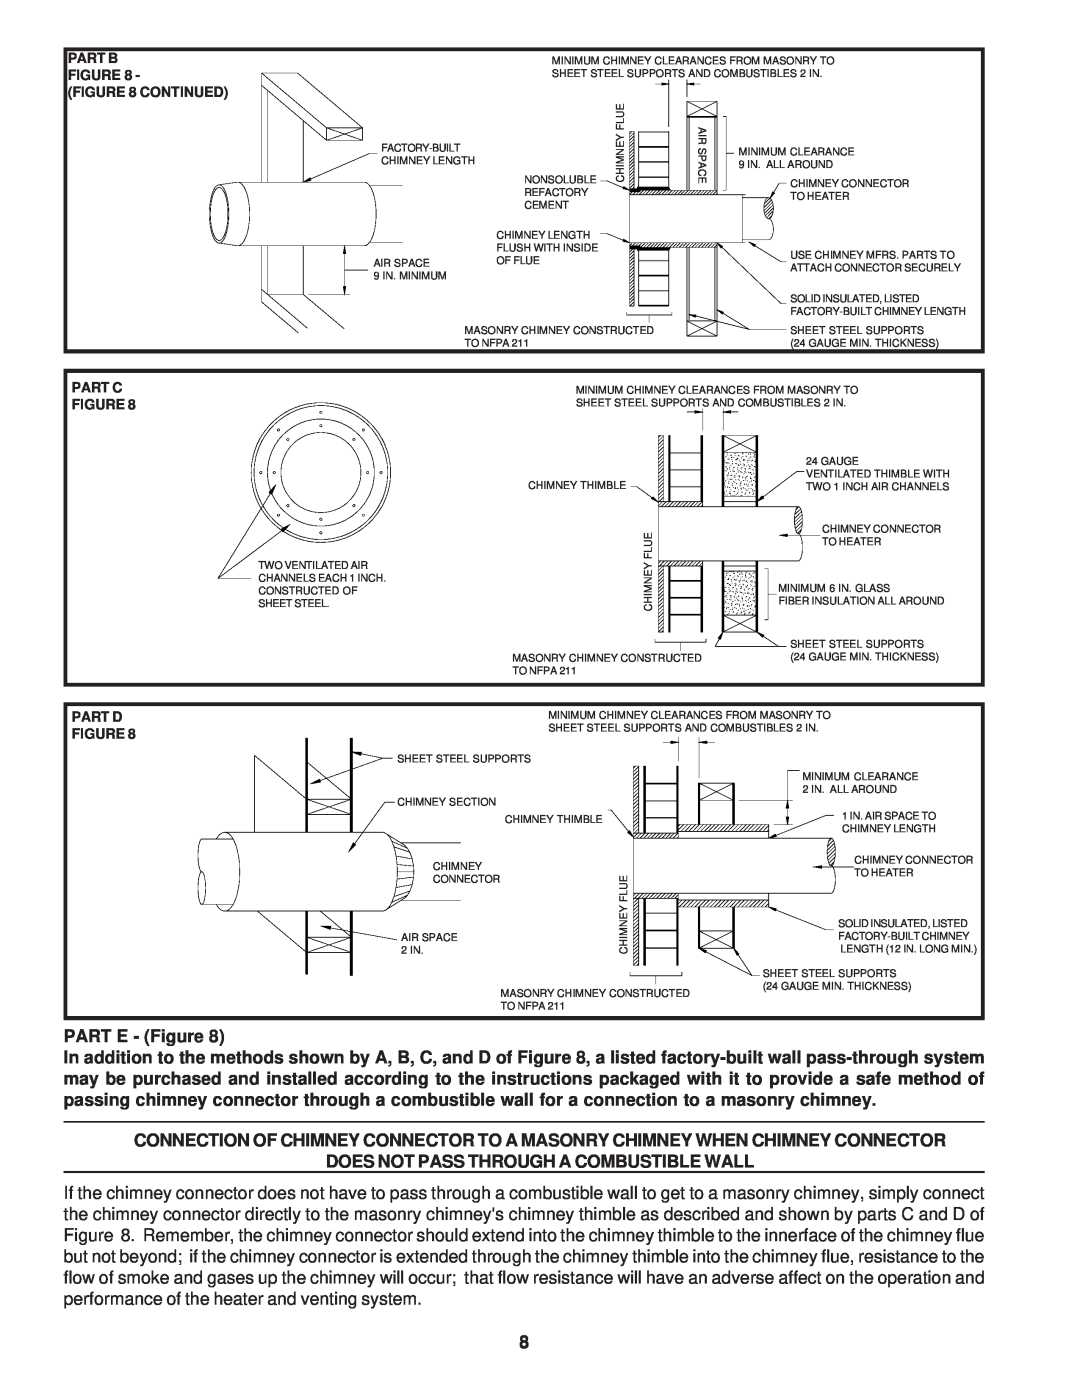 United States Stove 1261 PART E - Figure, Does Not Pass Through A Combustible Wall, Part B Figure Continued, Part C Figure 